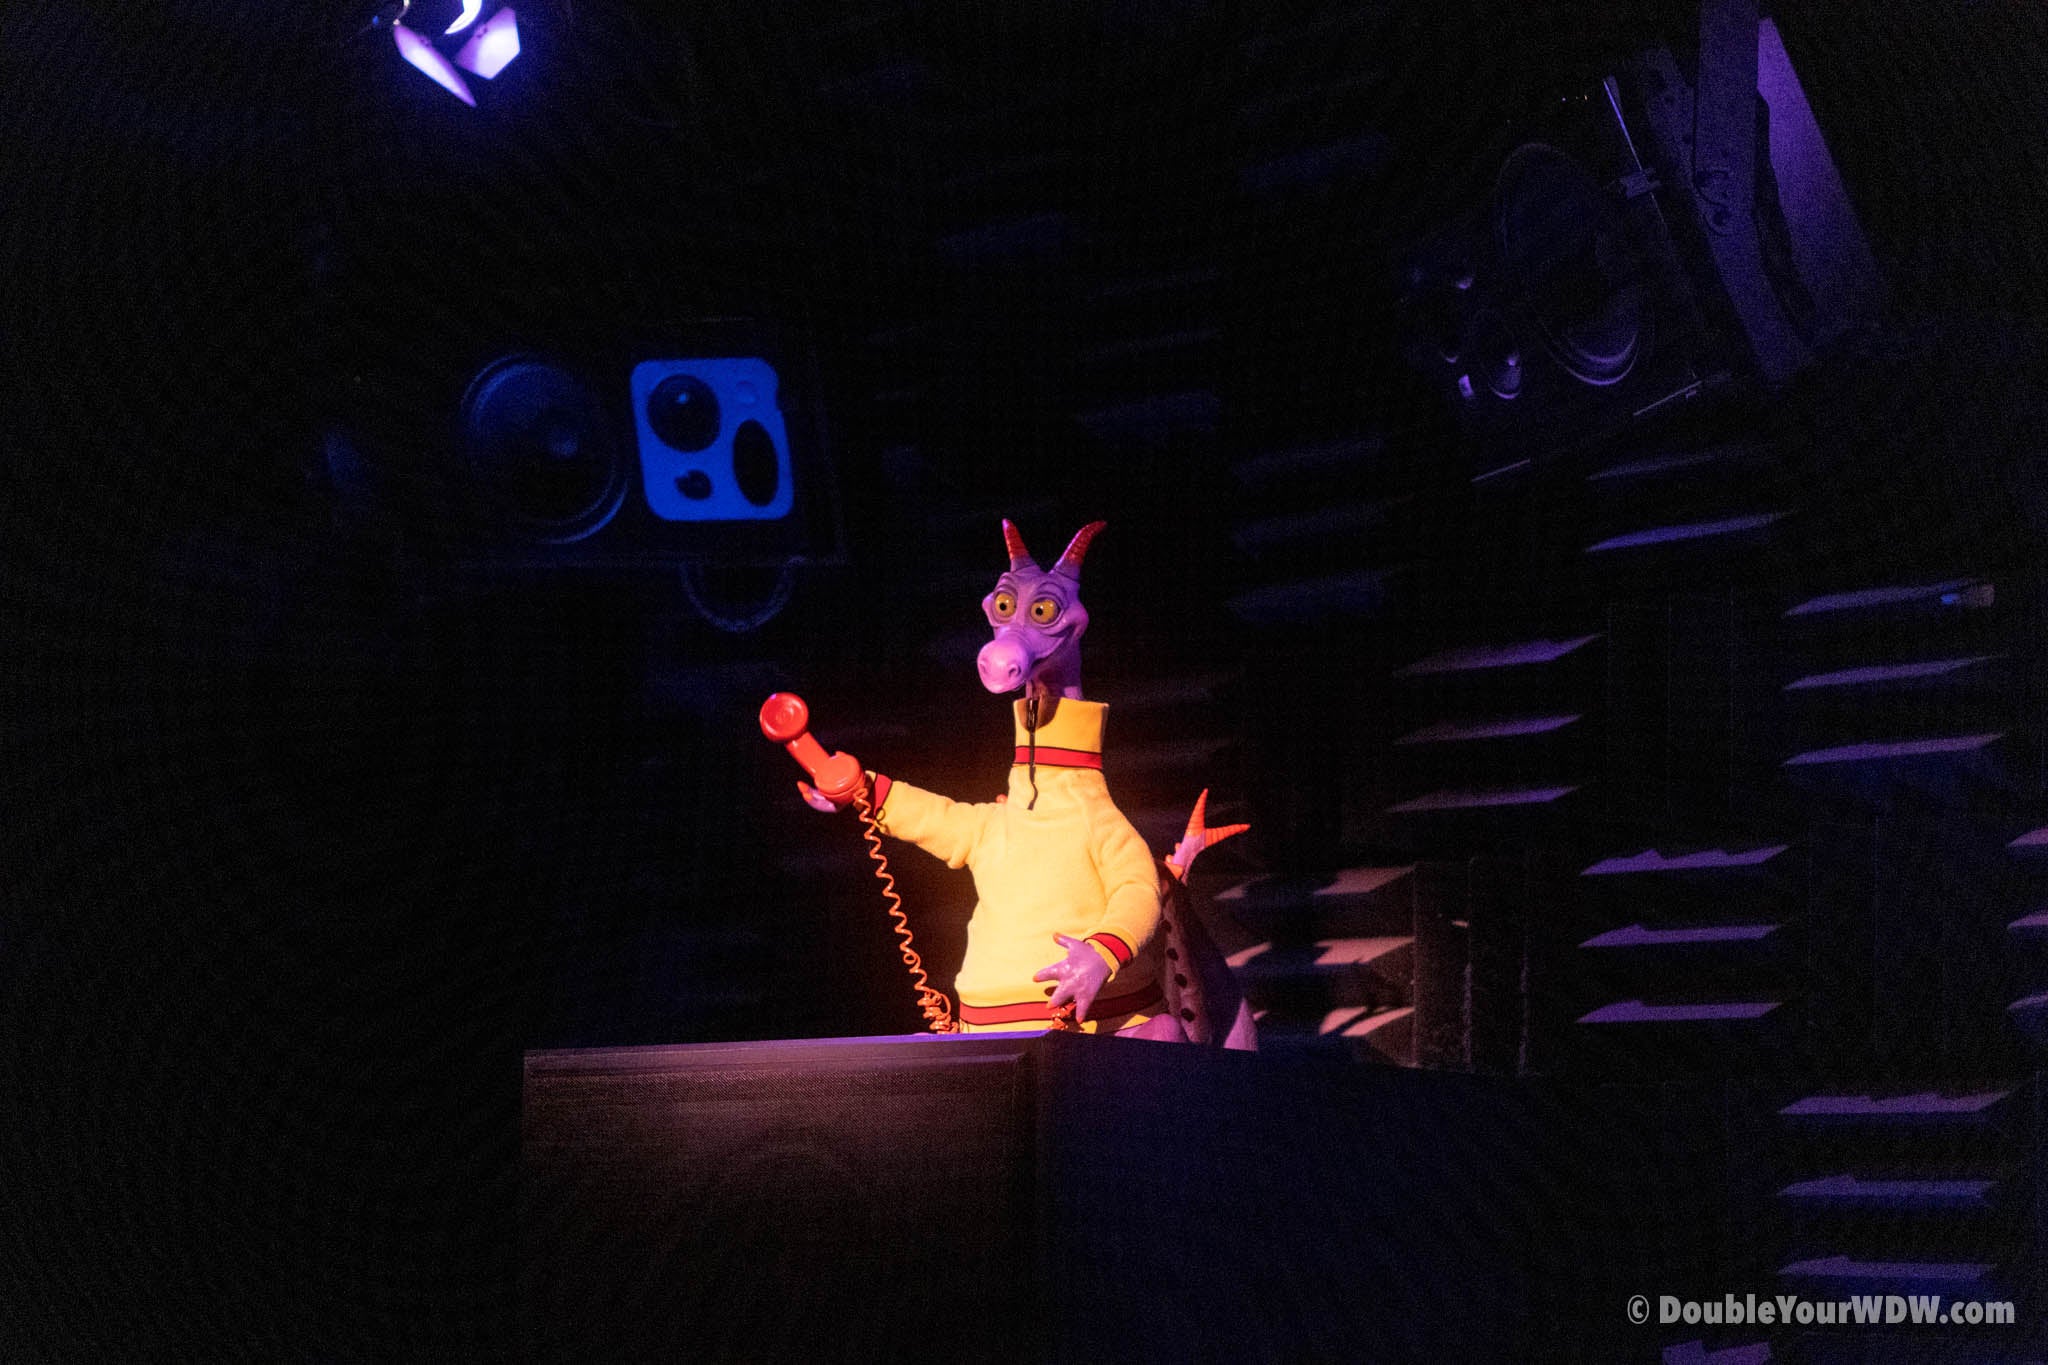 Journey in to imagination with Figment